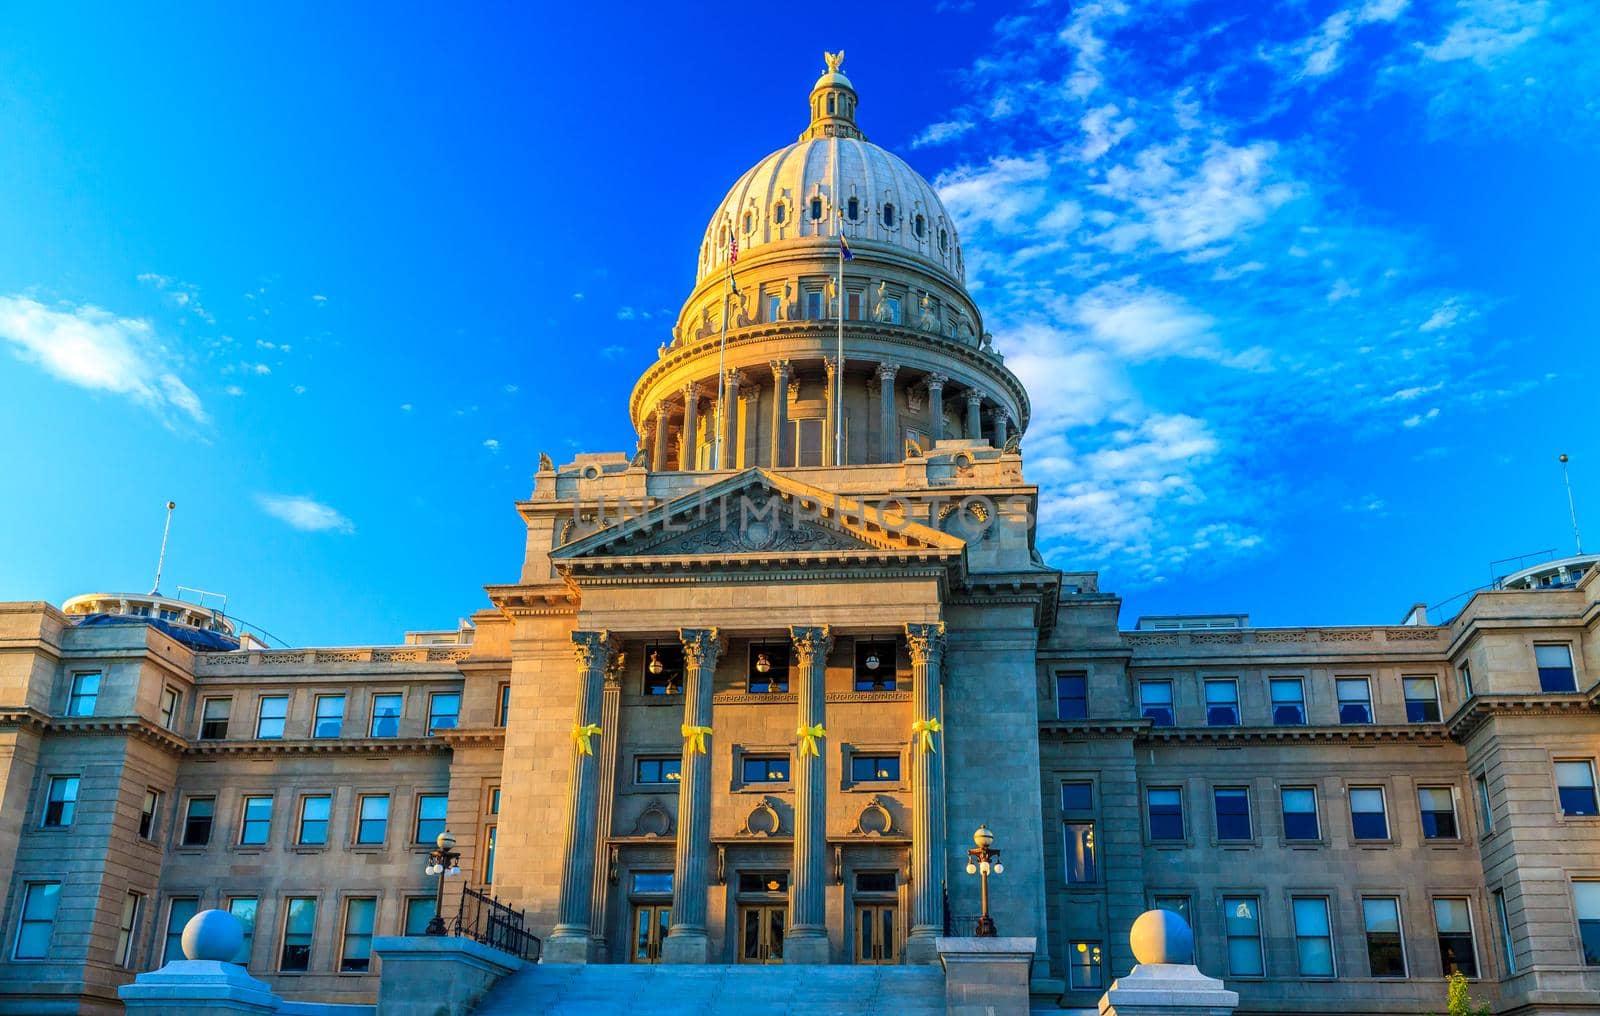 Idaho State Capitol Building by gepeng